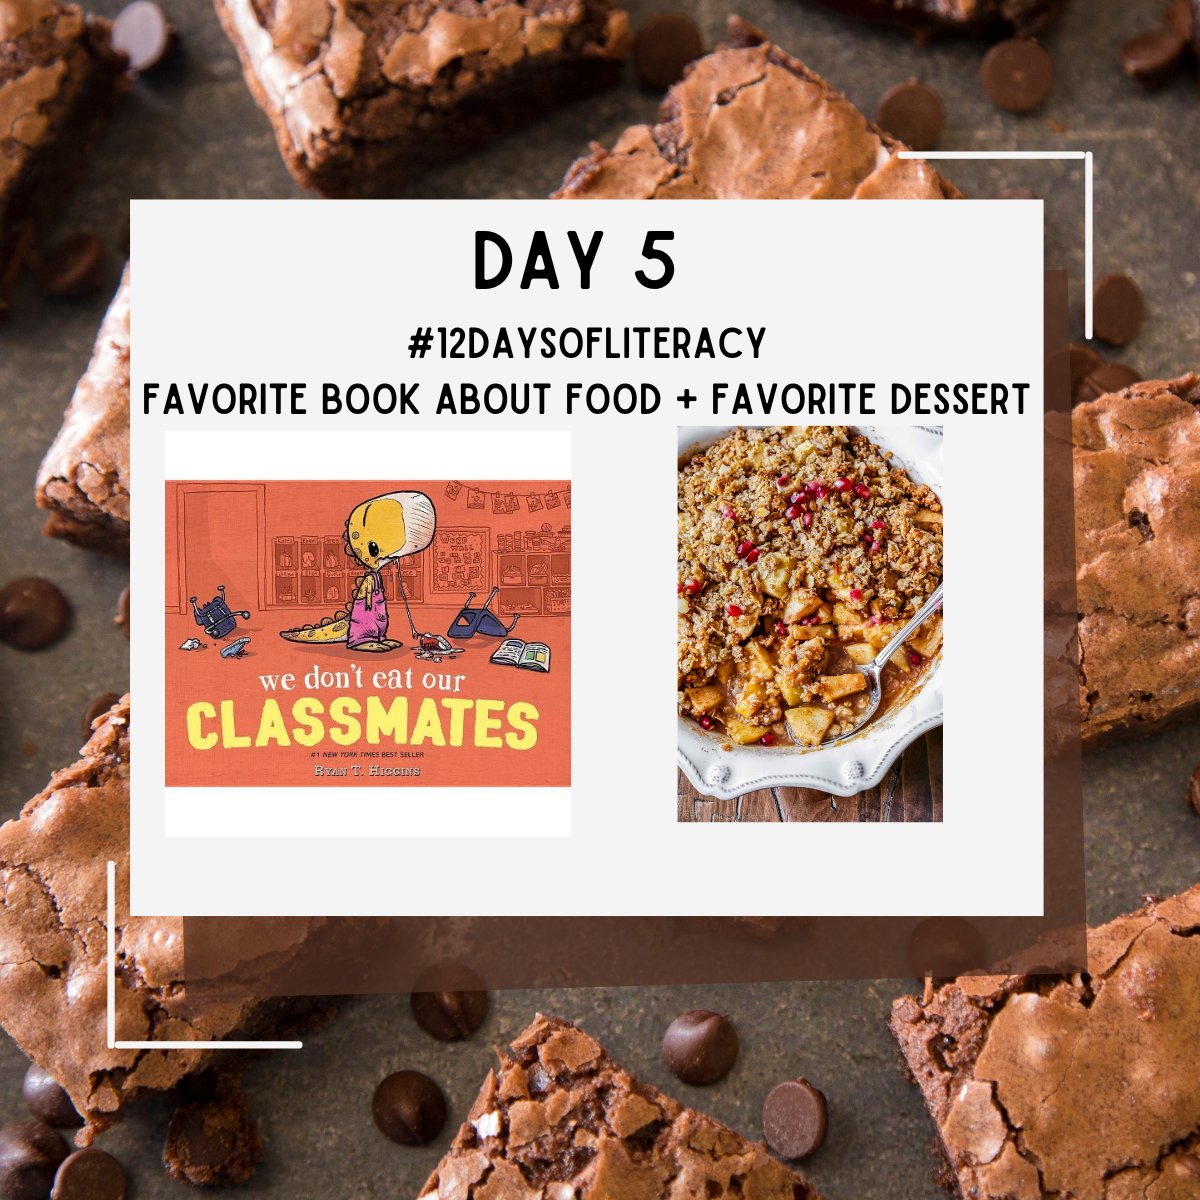 #12daysofliteracy We love books about food and our classmates are NOT food! (However, I will gladly eat a gluten free apple crisp any day! Add a cup of coffee and it's breakfast!) #katylibraries @katy_libraries